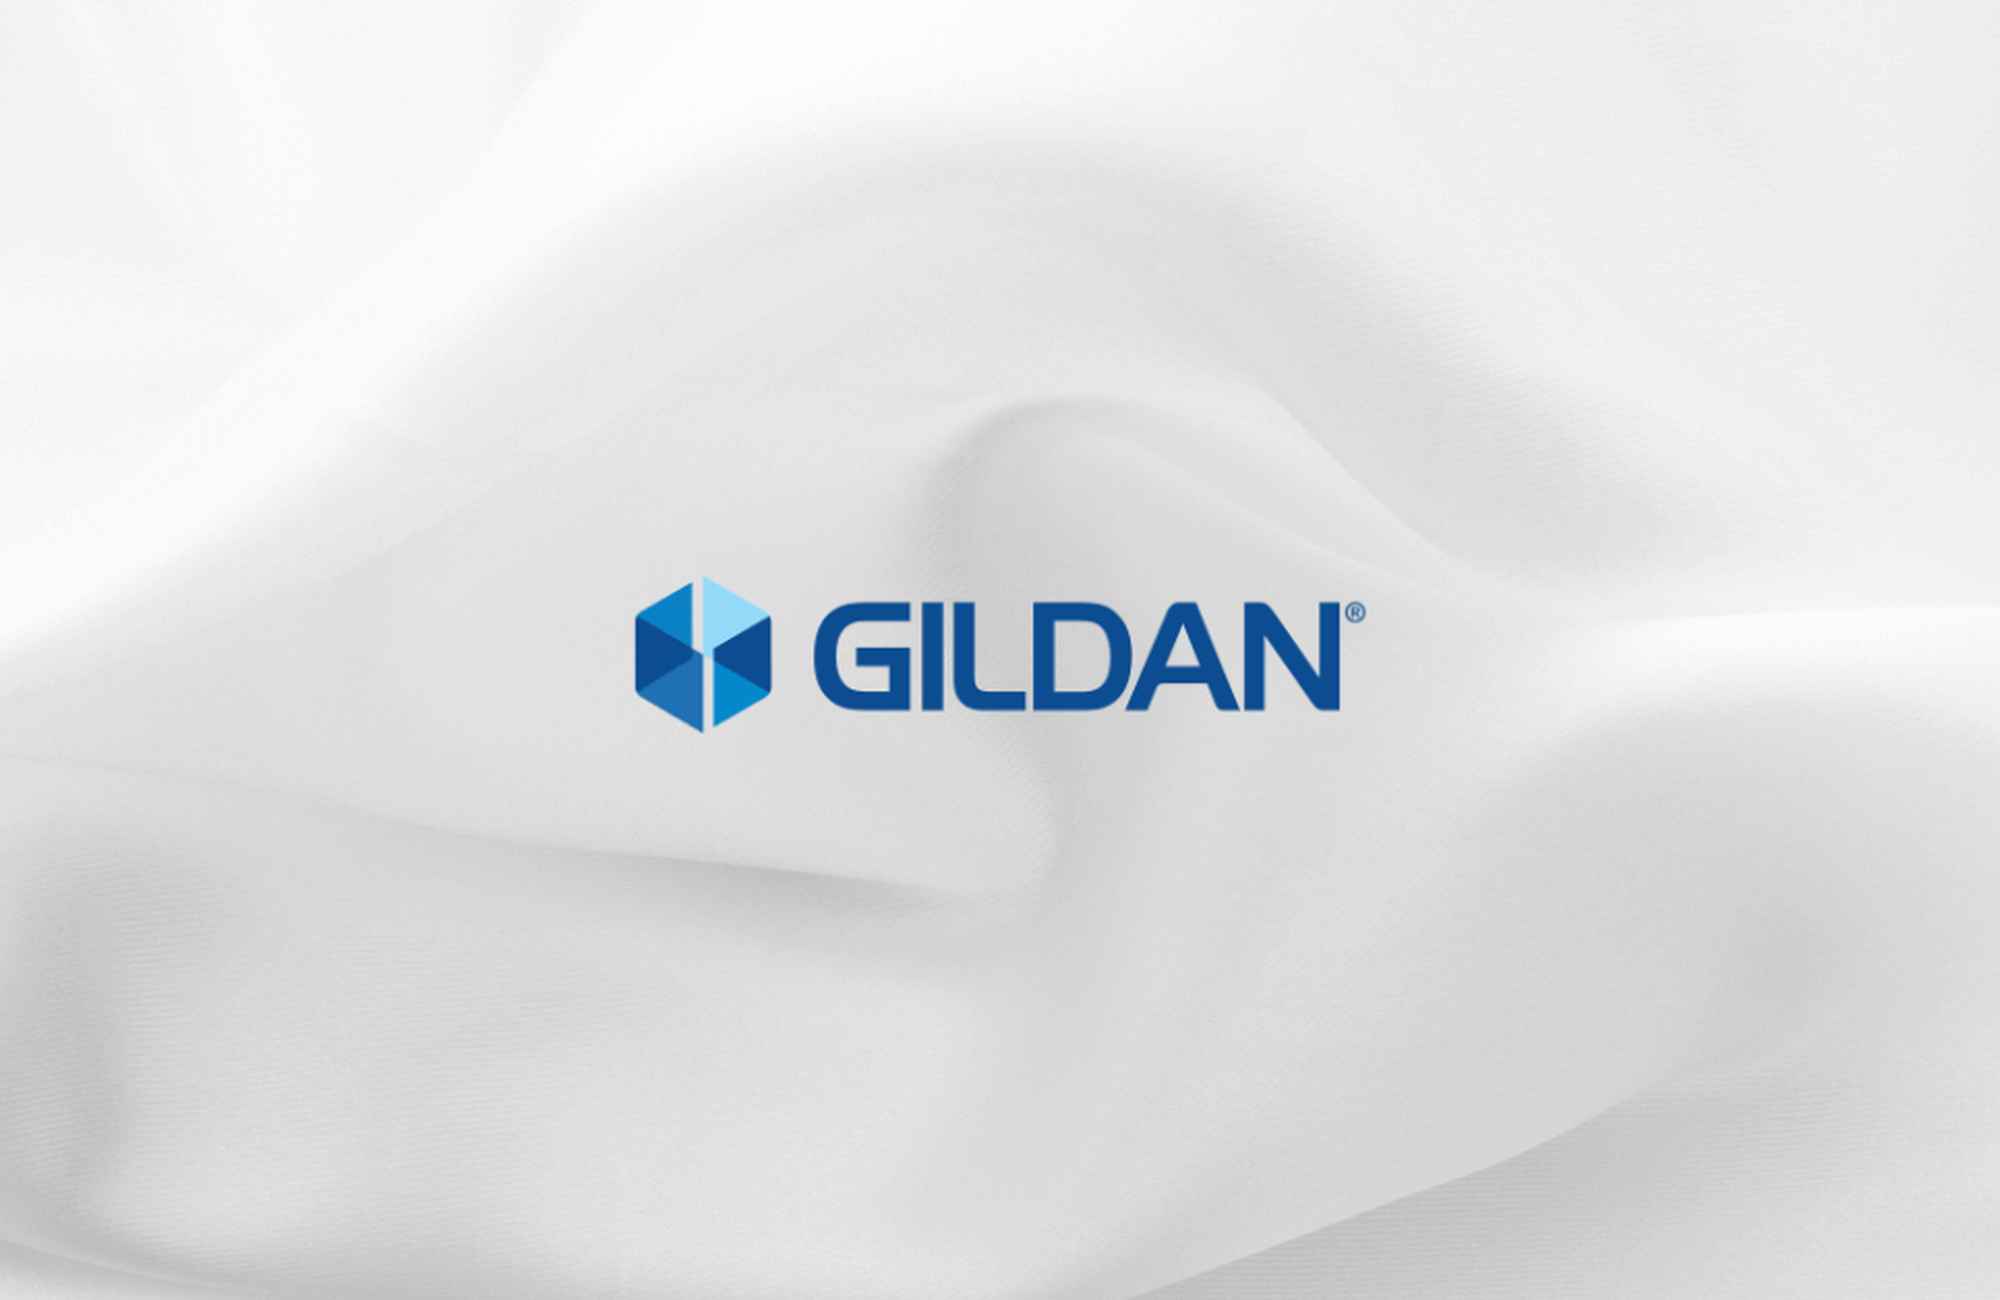 White fabric background with a Gildan logo centered on top